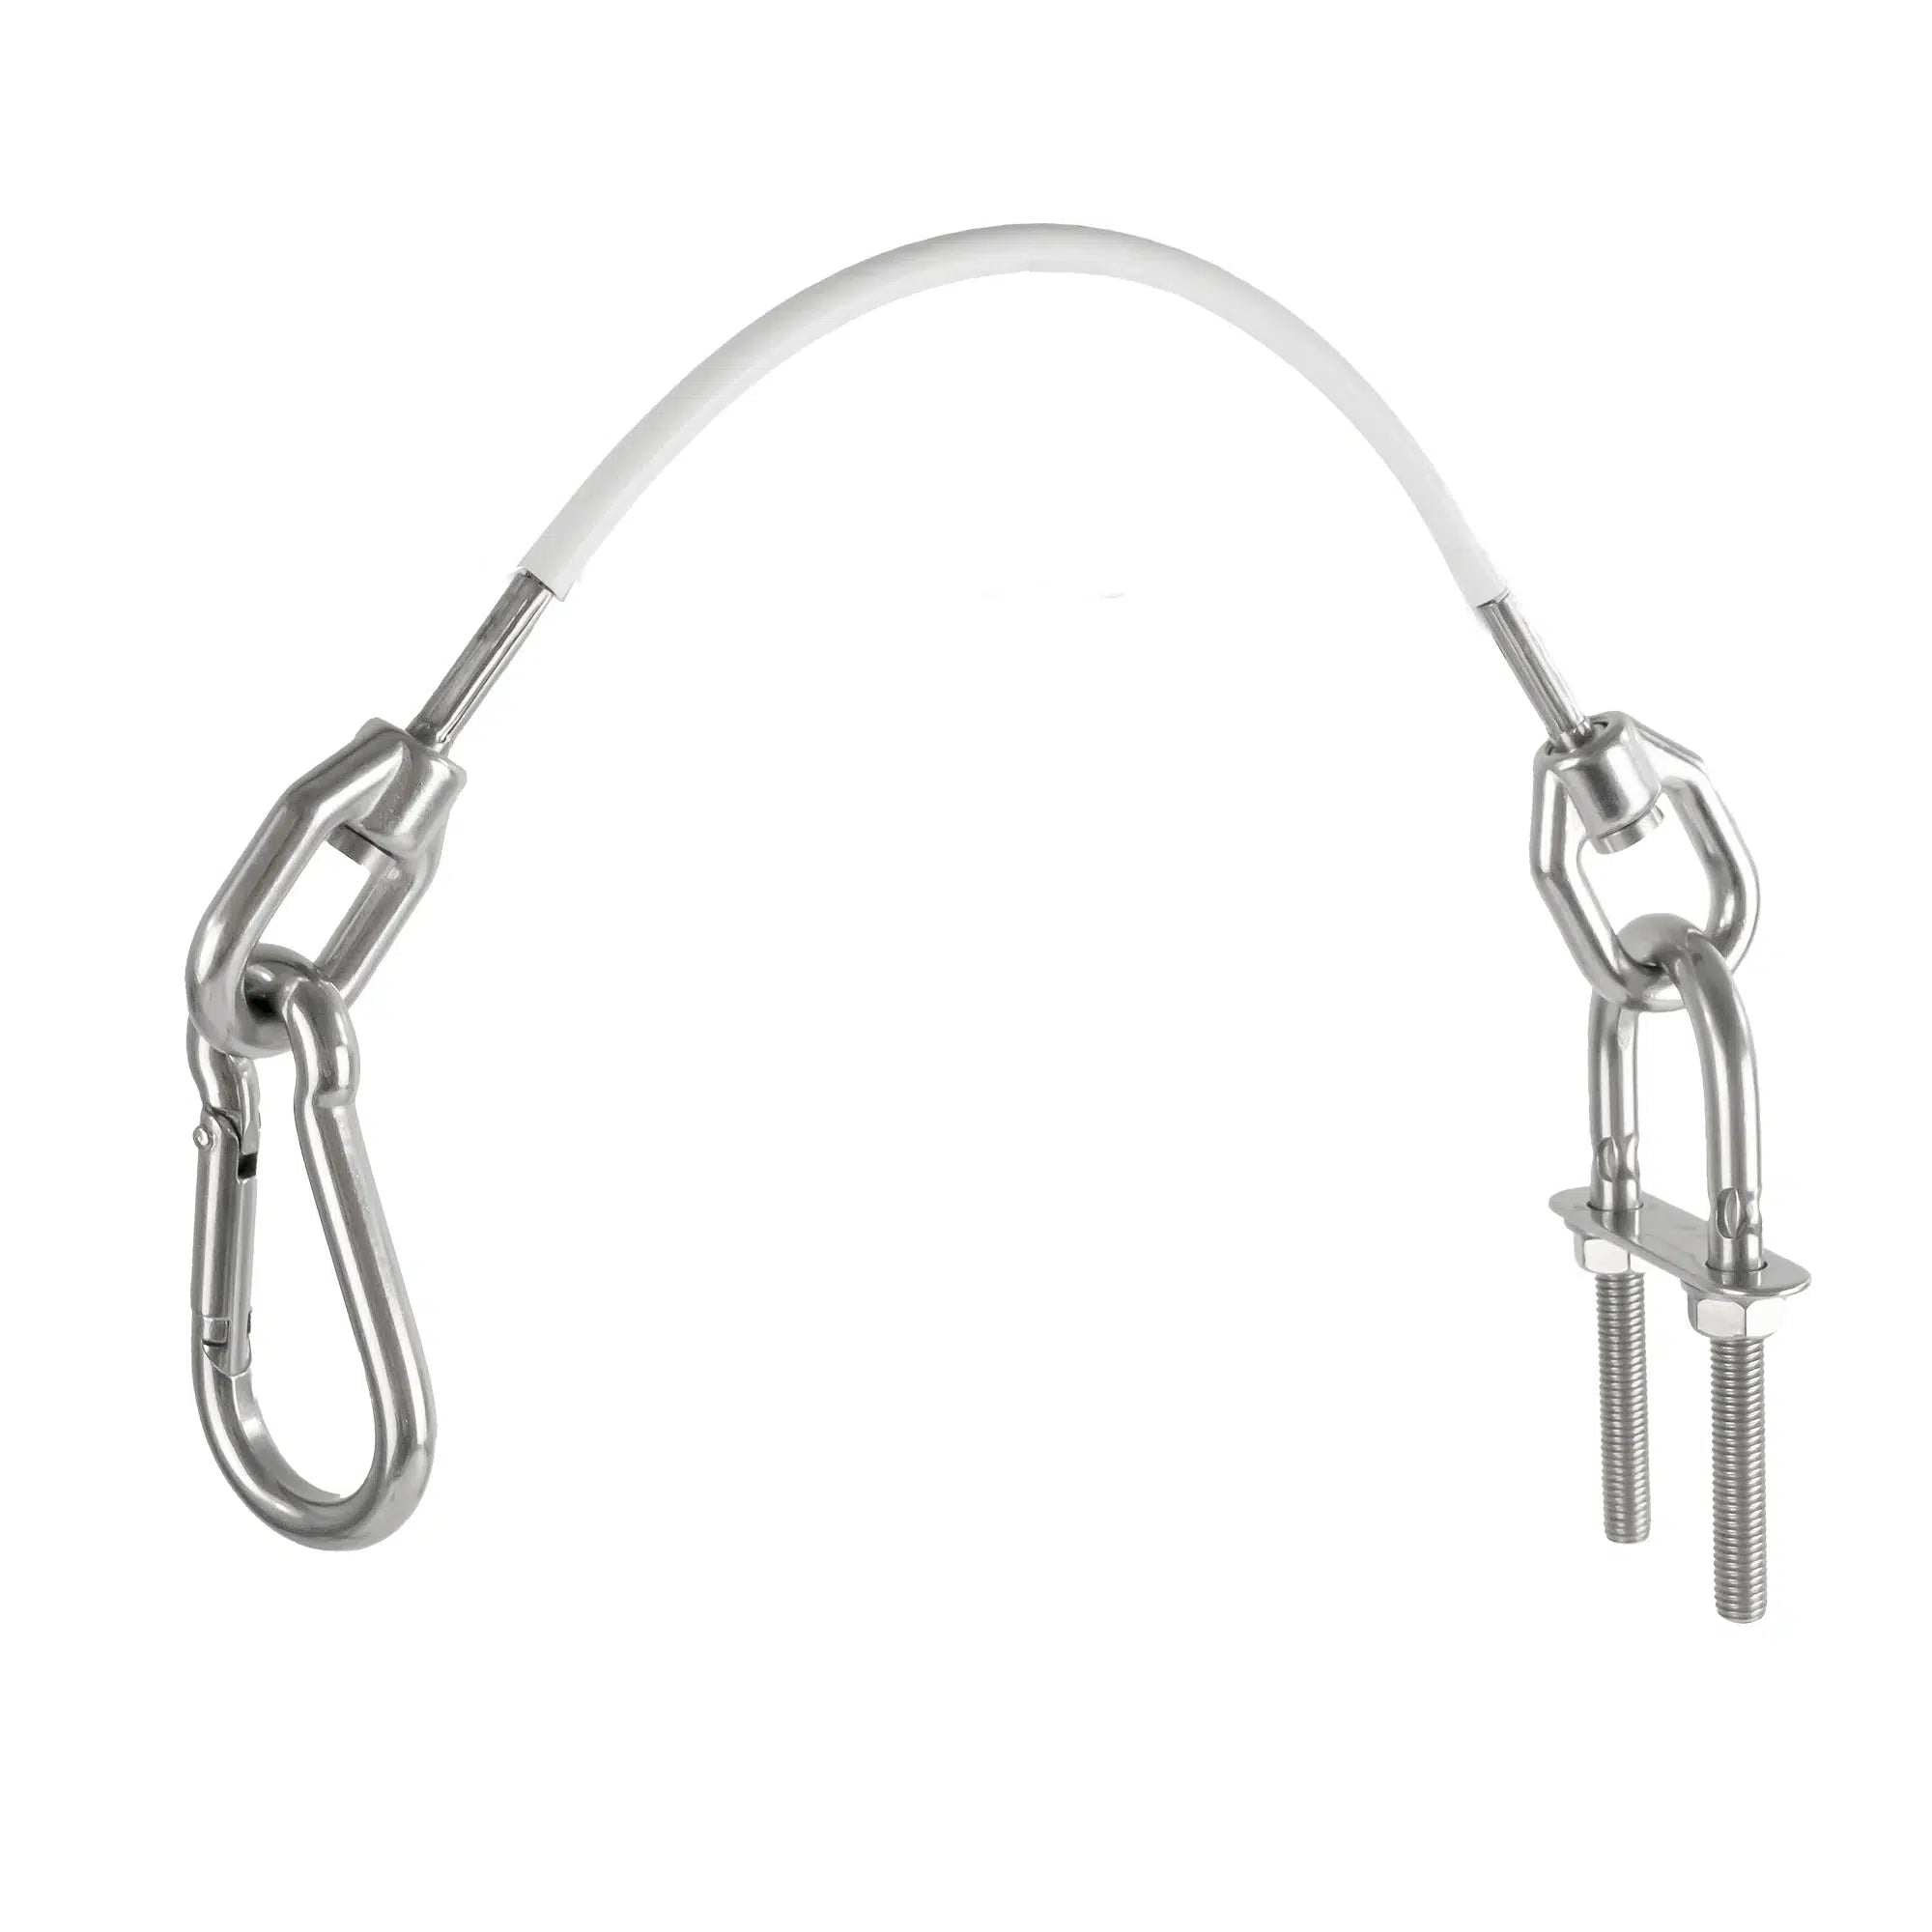 Anchor Safety Strap, Snap Hook Carabiner and 5/16" U-Bolt - Five Oceans-Canadian Marine &amp; Outdoor Equipment